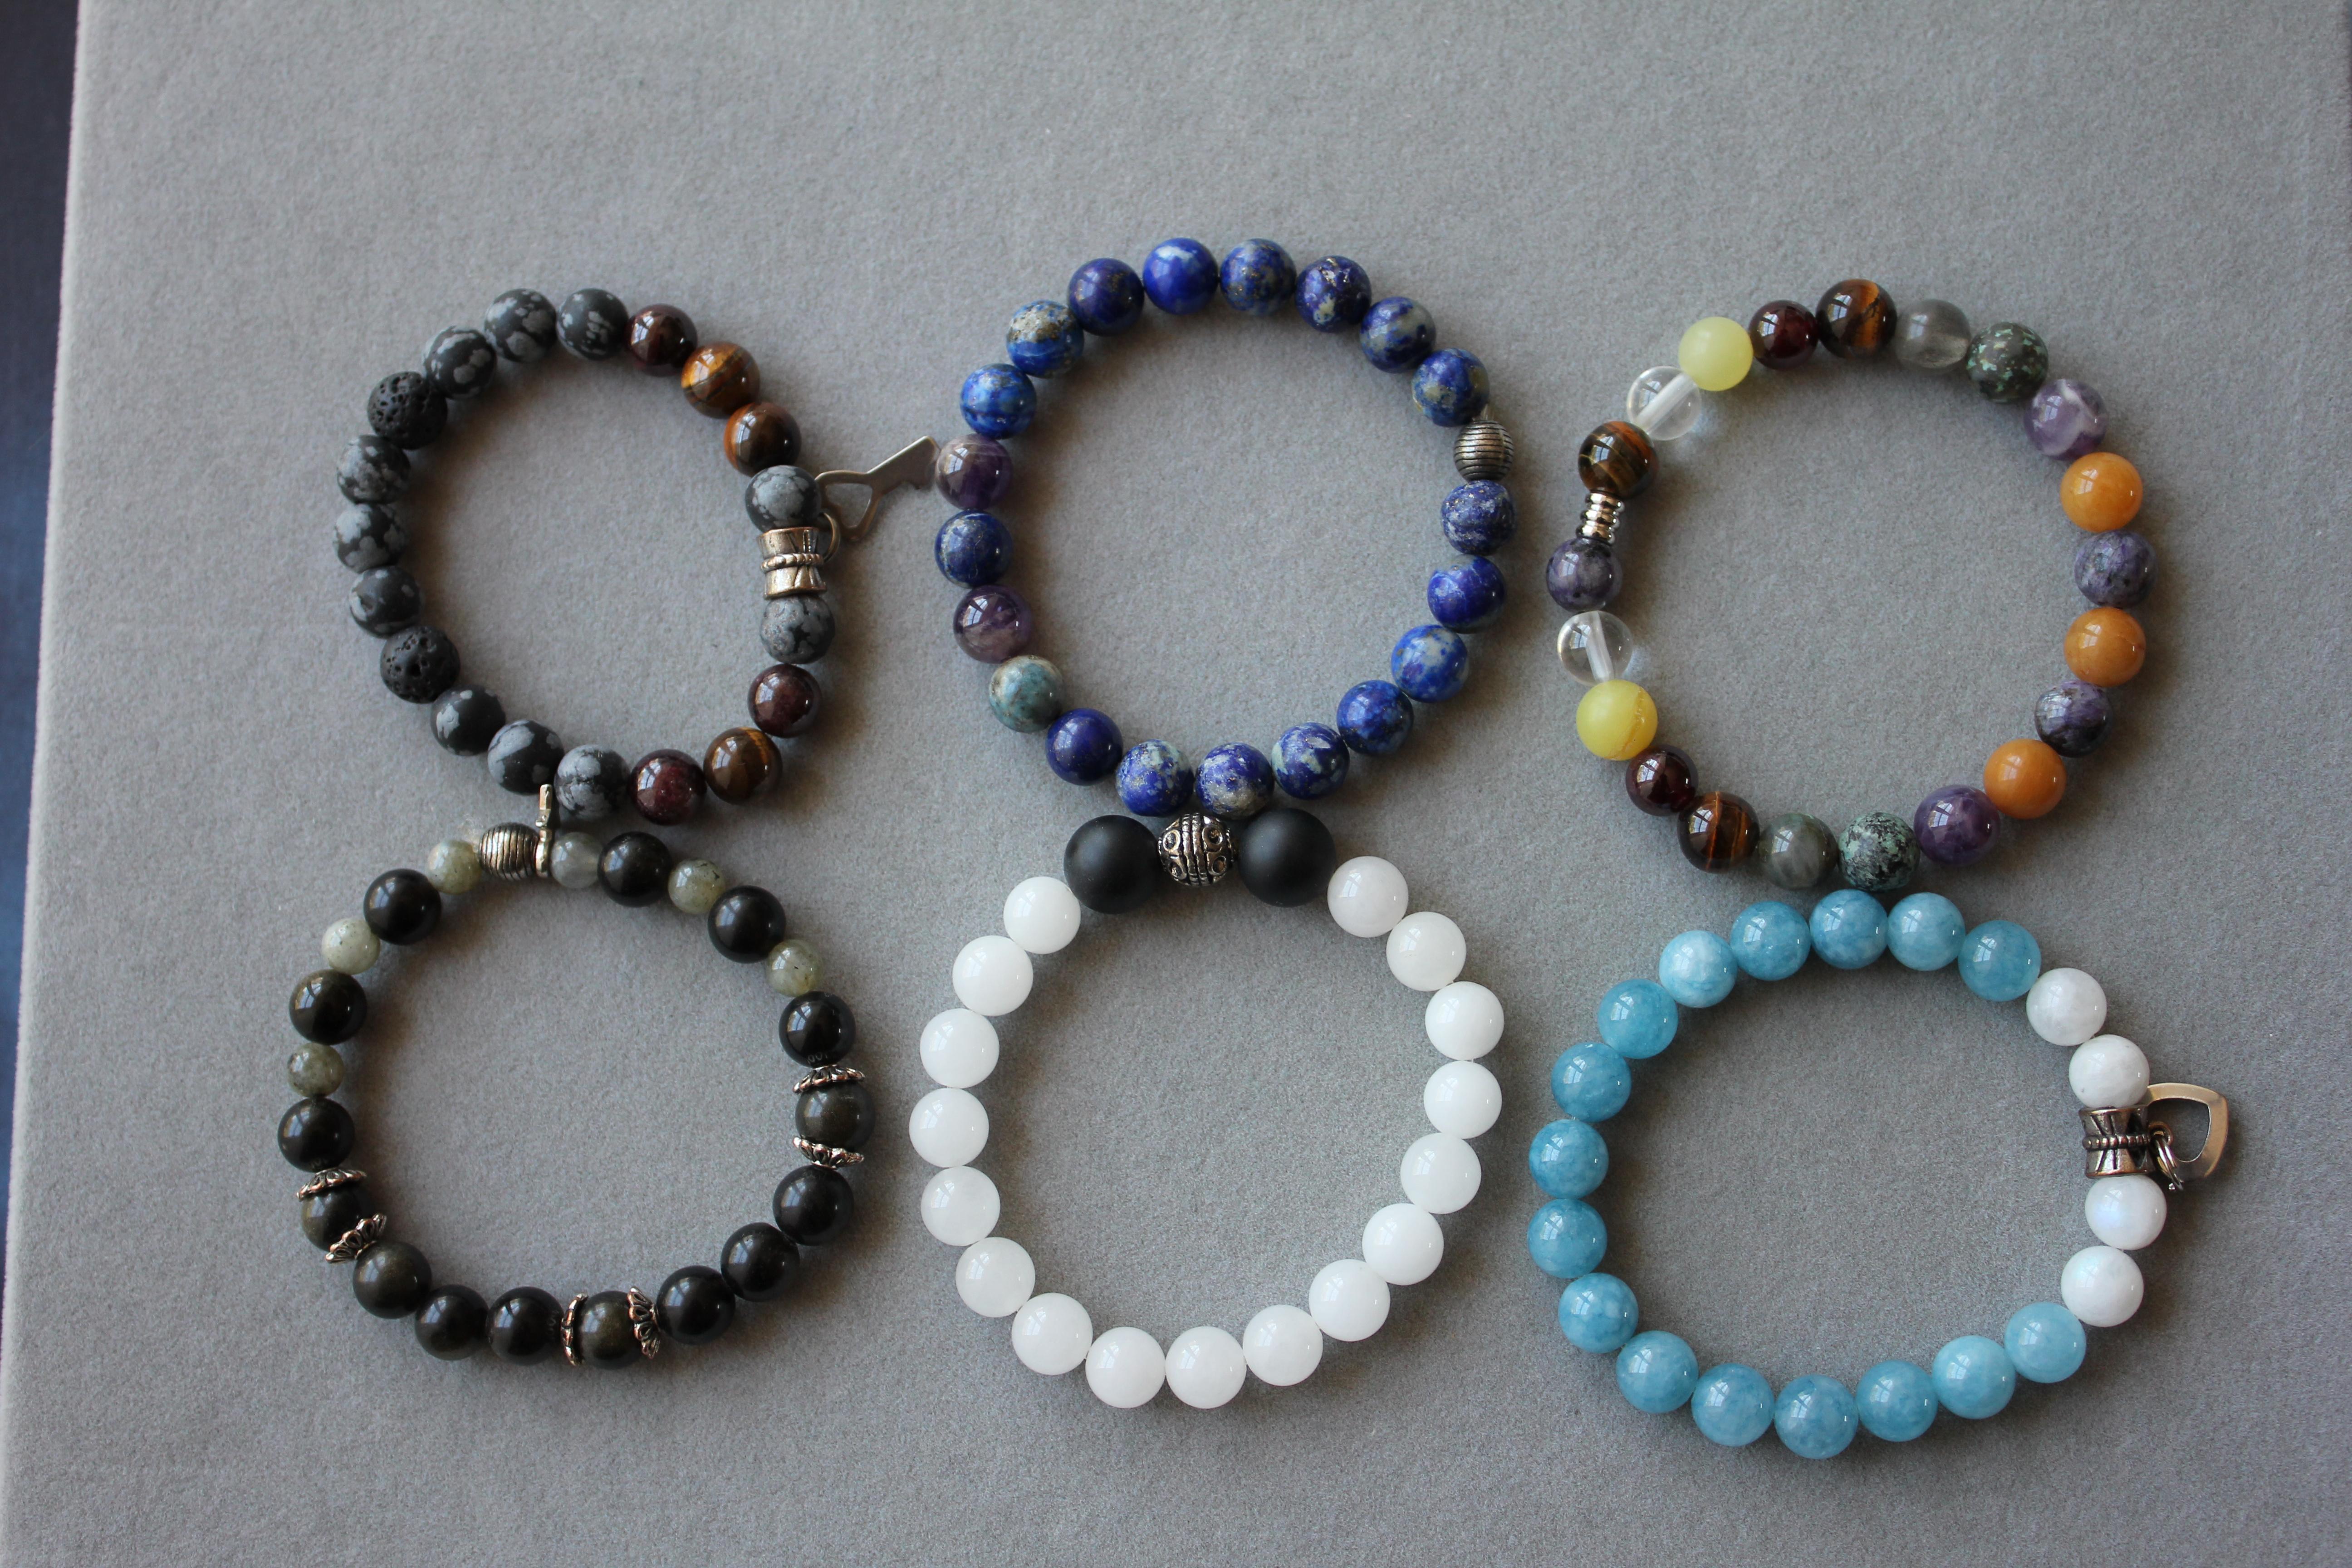 Black Agate Earth Gemstone Round Chakra Beads Stretchy Unique Statement Bracelet For Sale 1